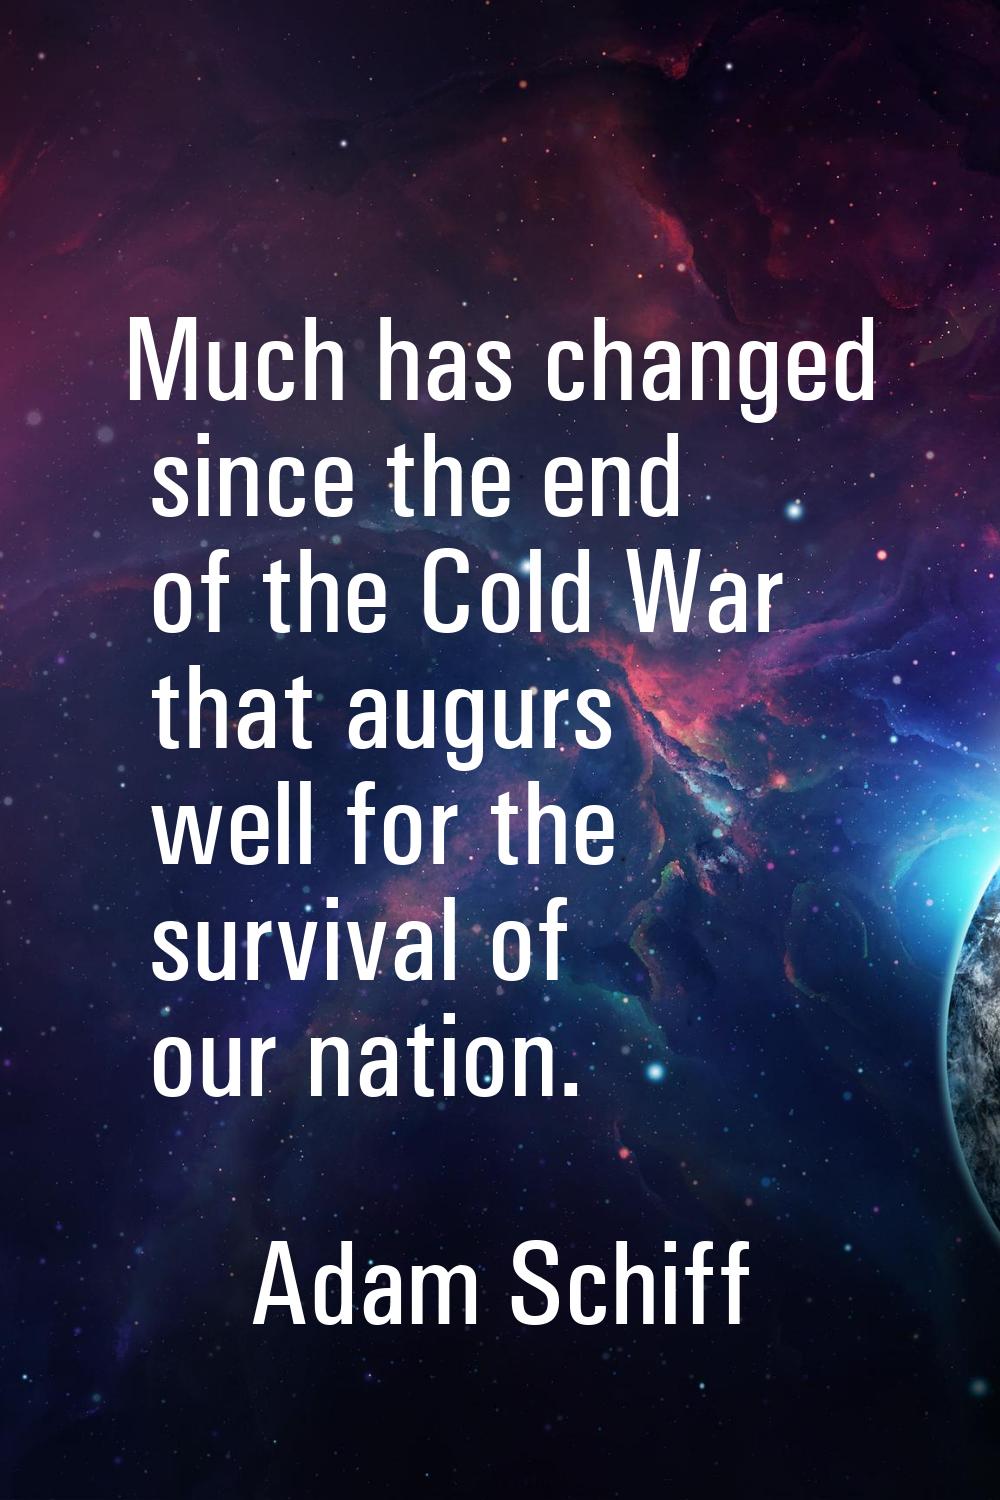 Much has changed since the end of the Cold War that augurs well for the survival of our nation.